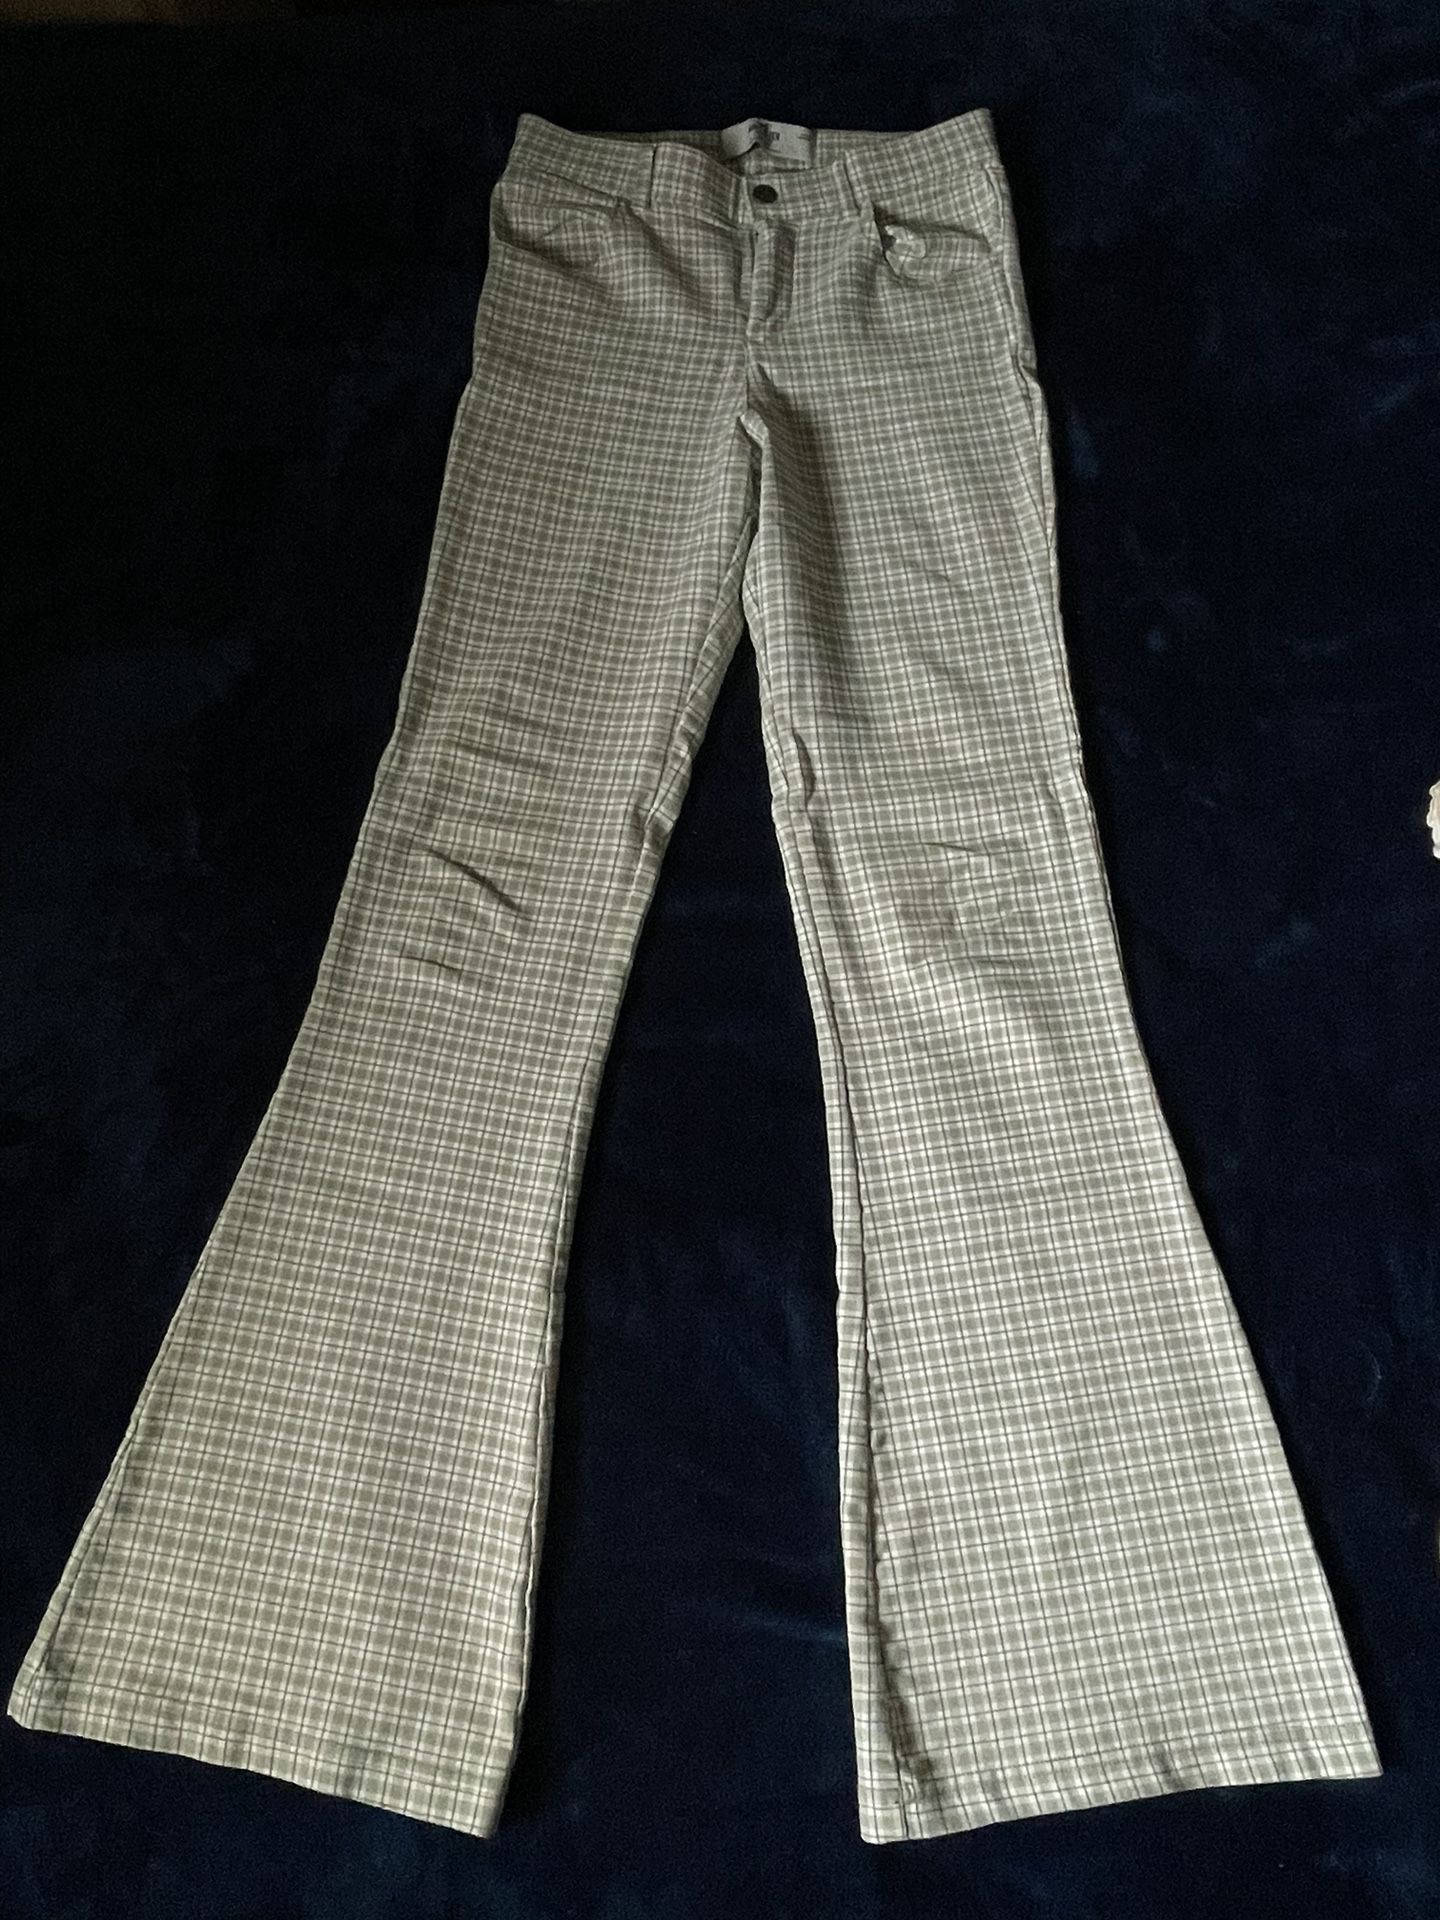 Boot Cut Pants for Sale in Las Vegas, NV - OfferUp